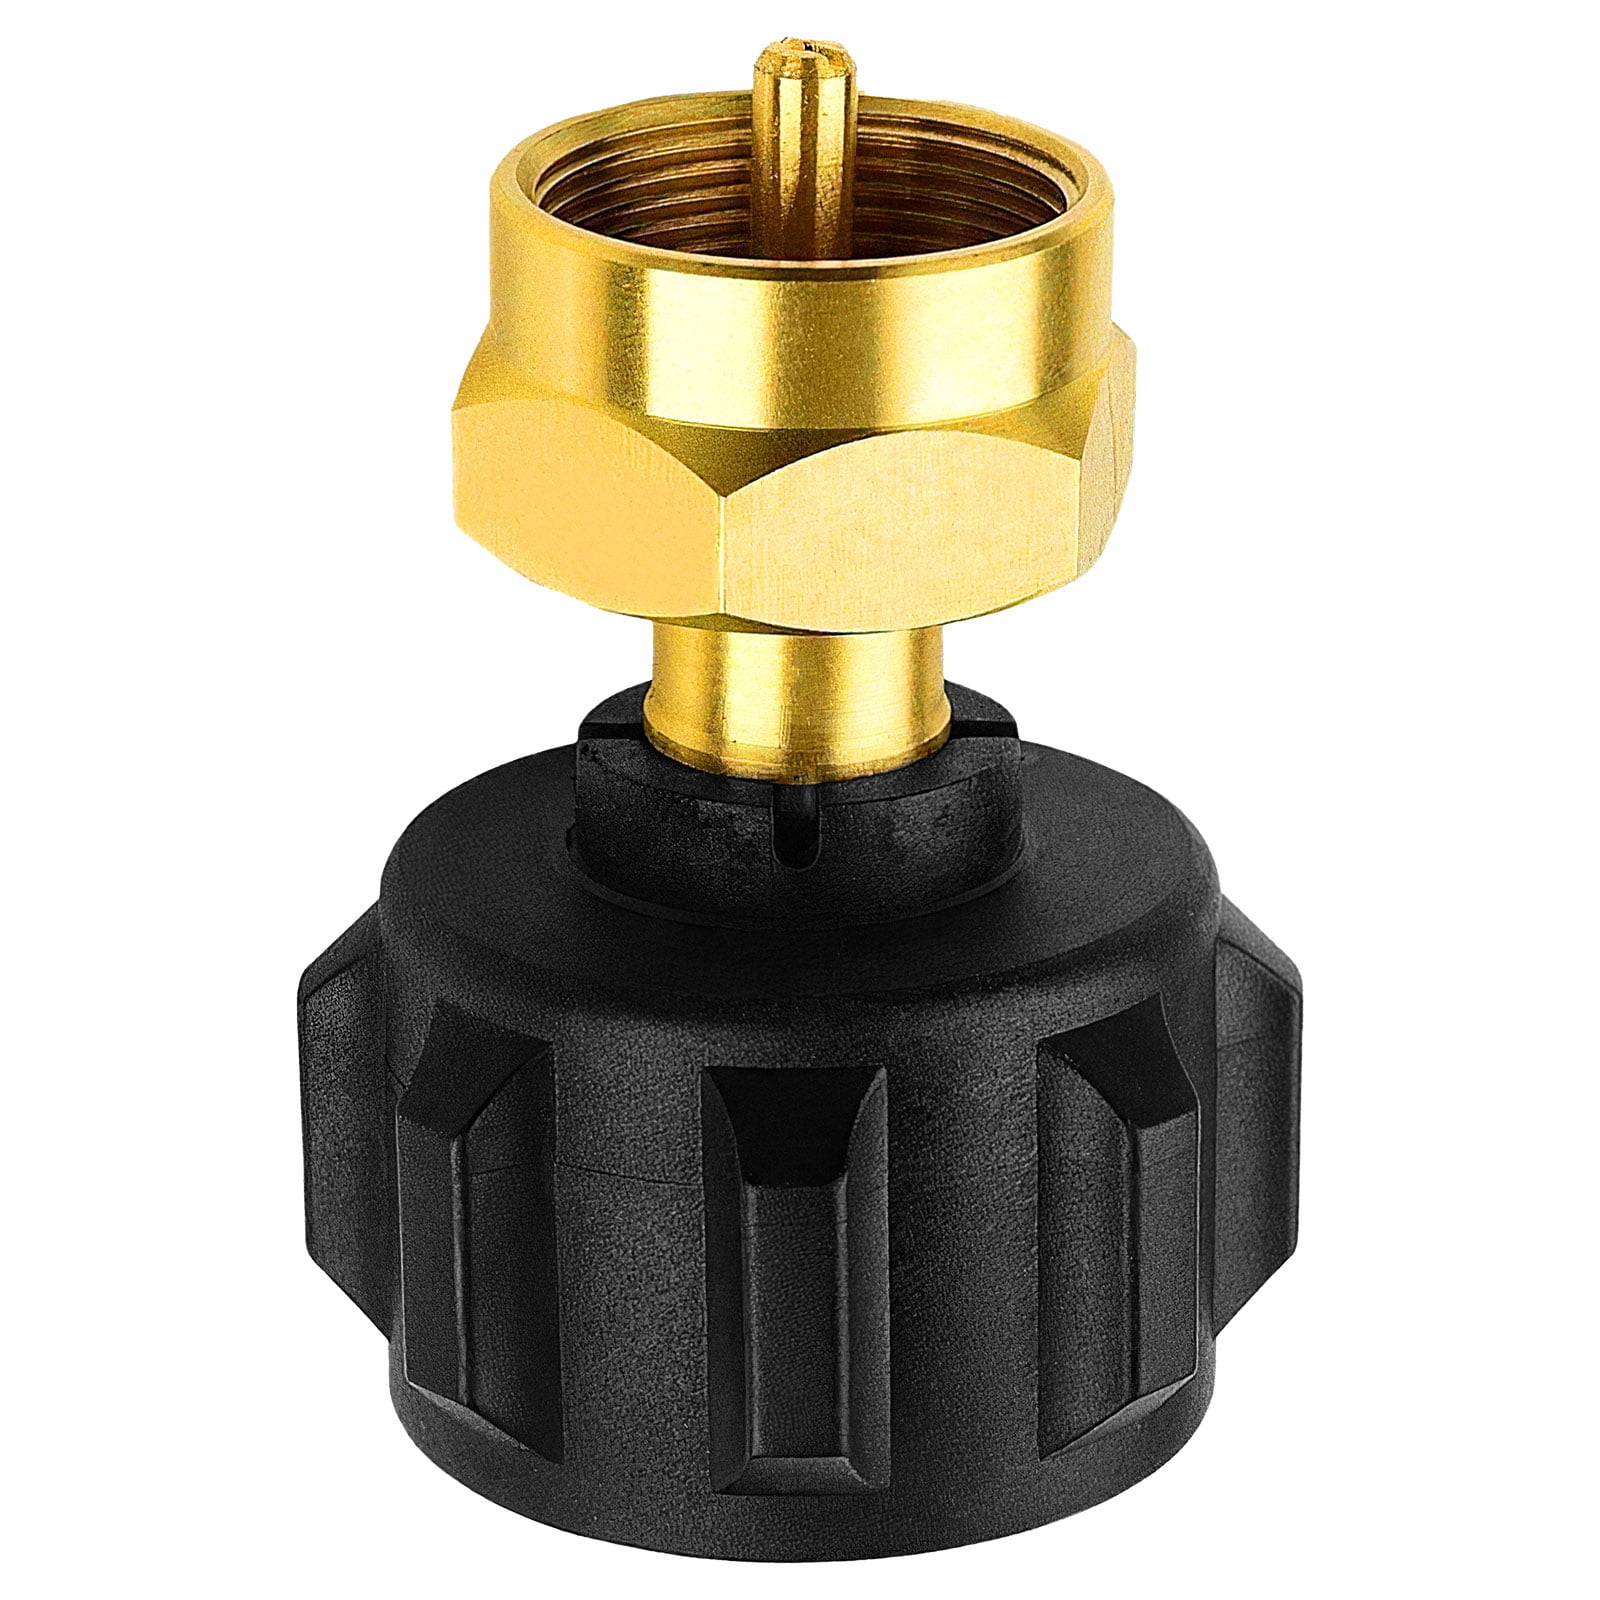 Propane Refill Adapter Gas Cylinder Tank Connecter Gas Adapter Joint Accessory Gas Bottle Refill Kit,Control Valve Accessories 